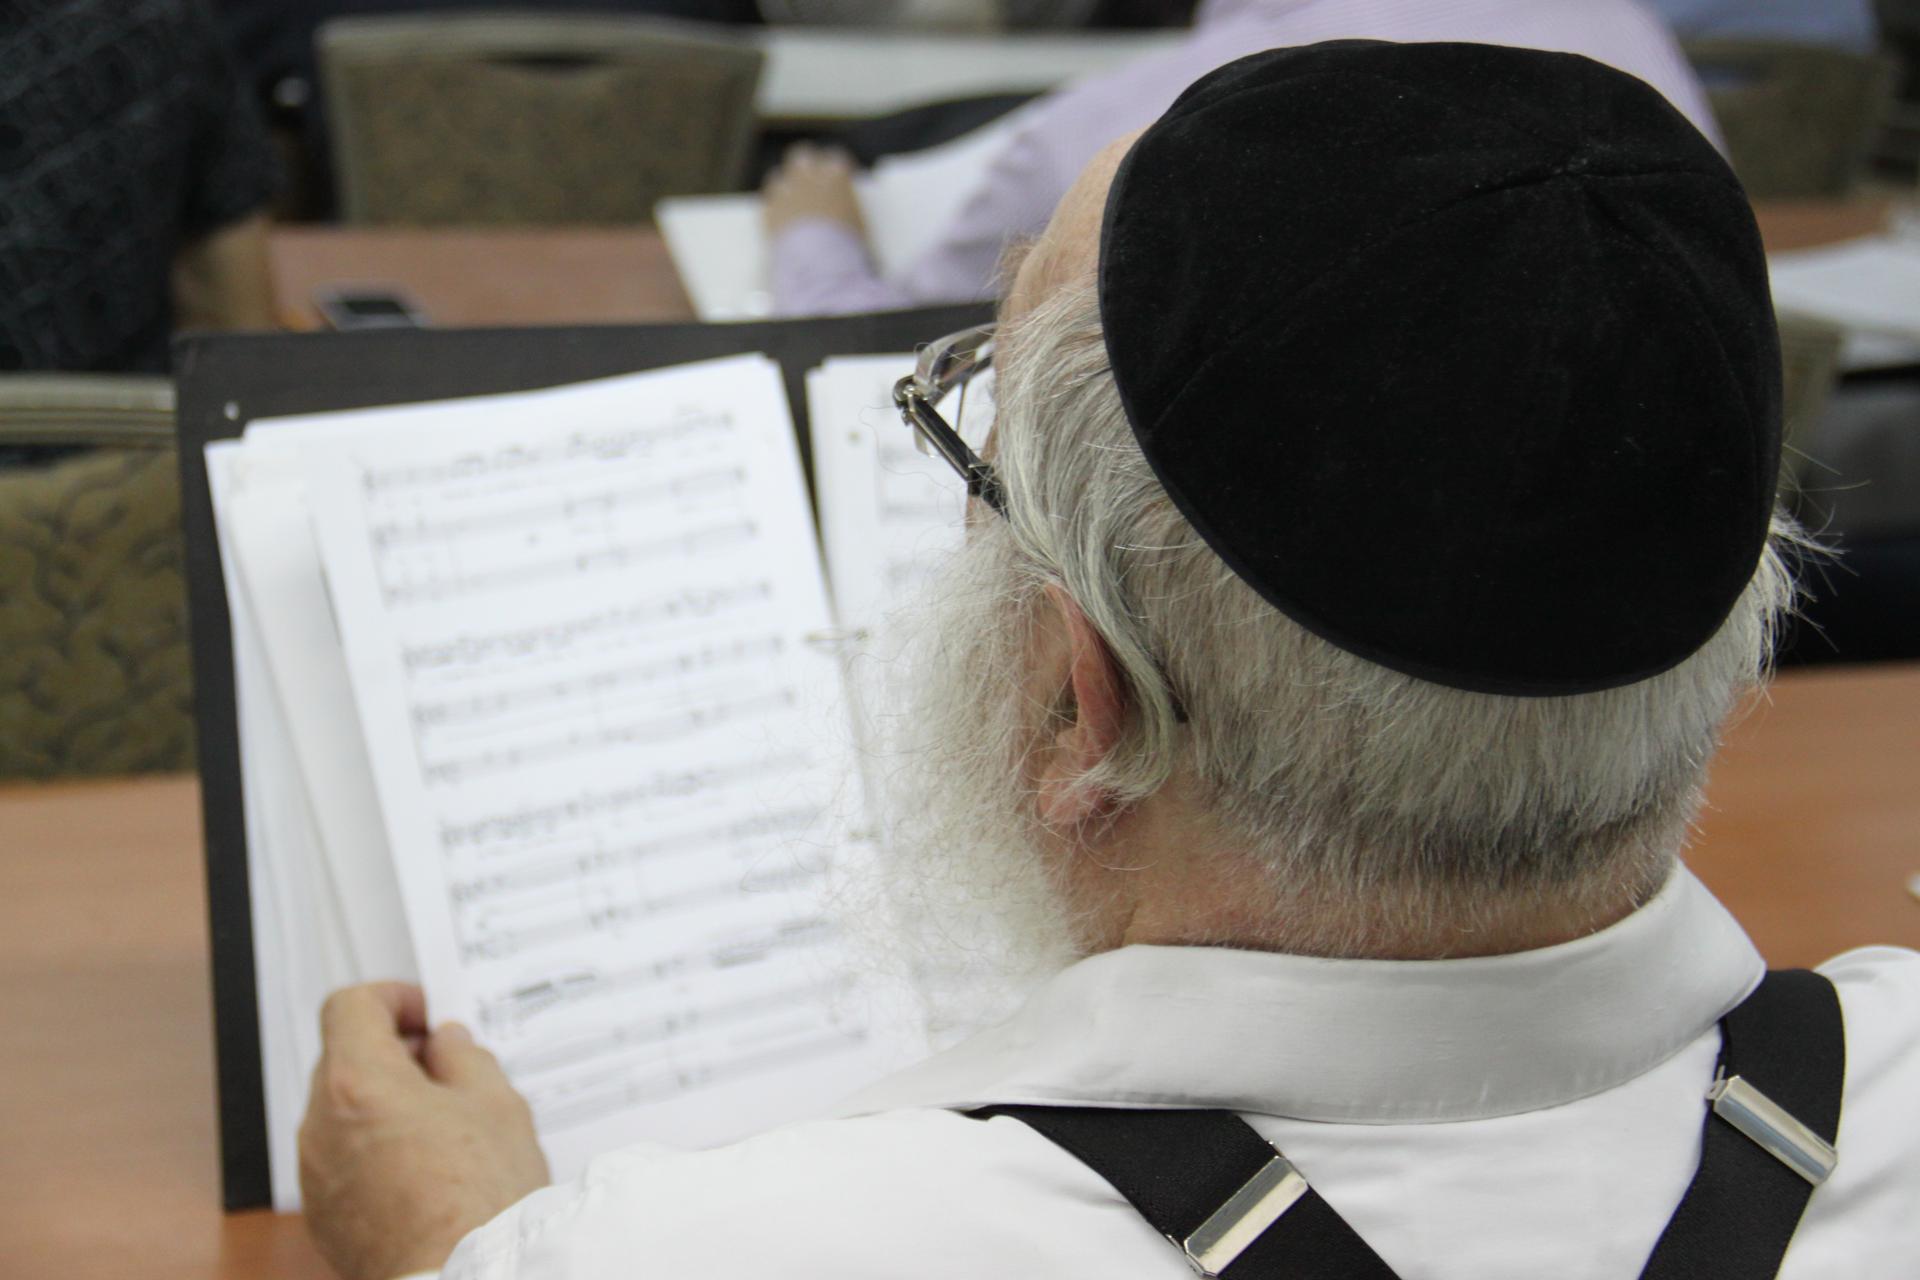 Cantor Chaim Adler looks over the sheet music from the Kol Nidre prayer, sung on the eve of Yom Kippur, the Jewish Day of Atonement.